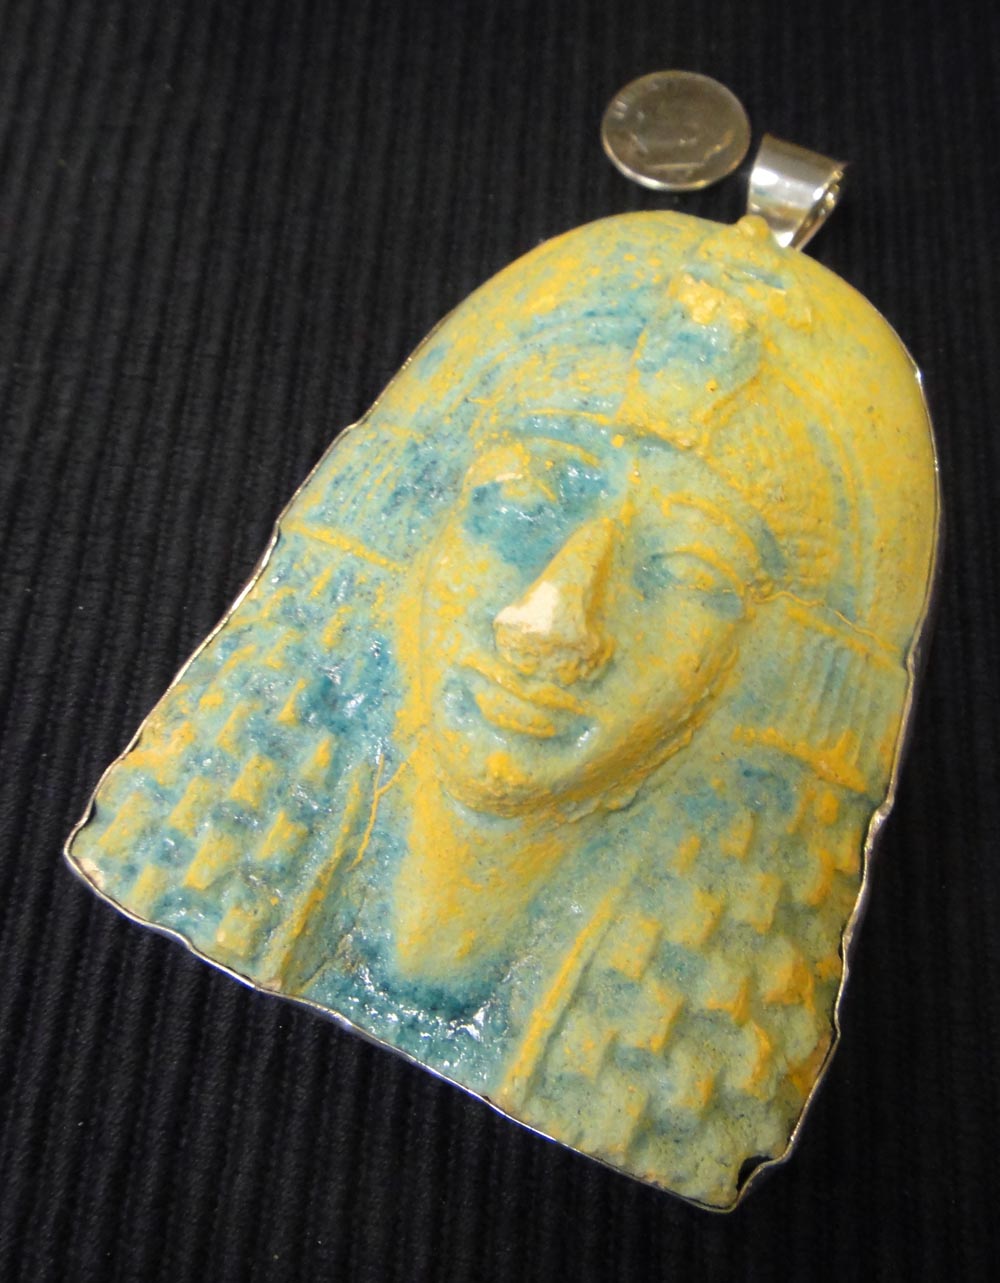 King Tutankhamun bust and sterling silver pendant with dime for size